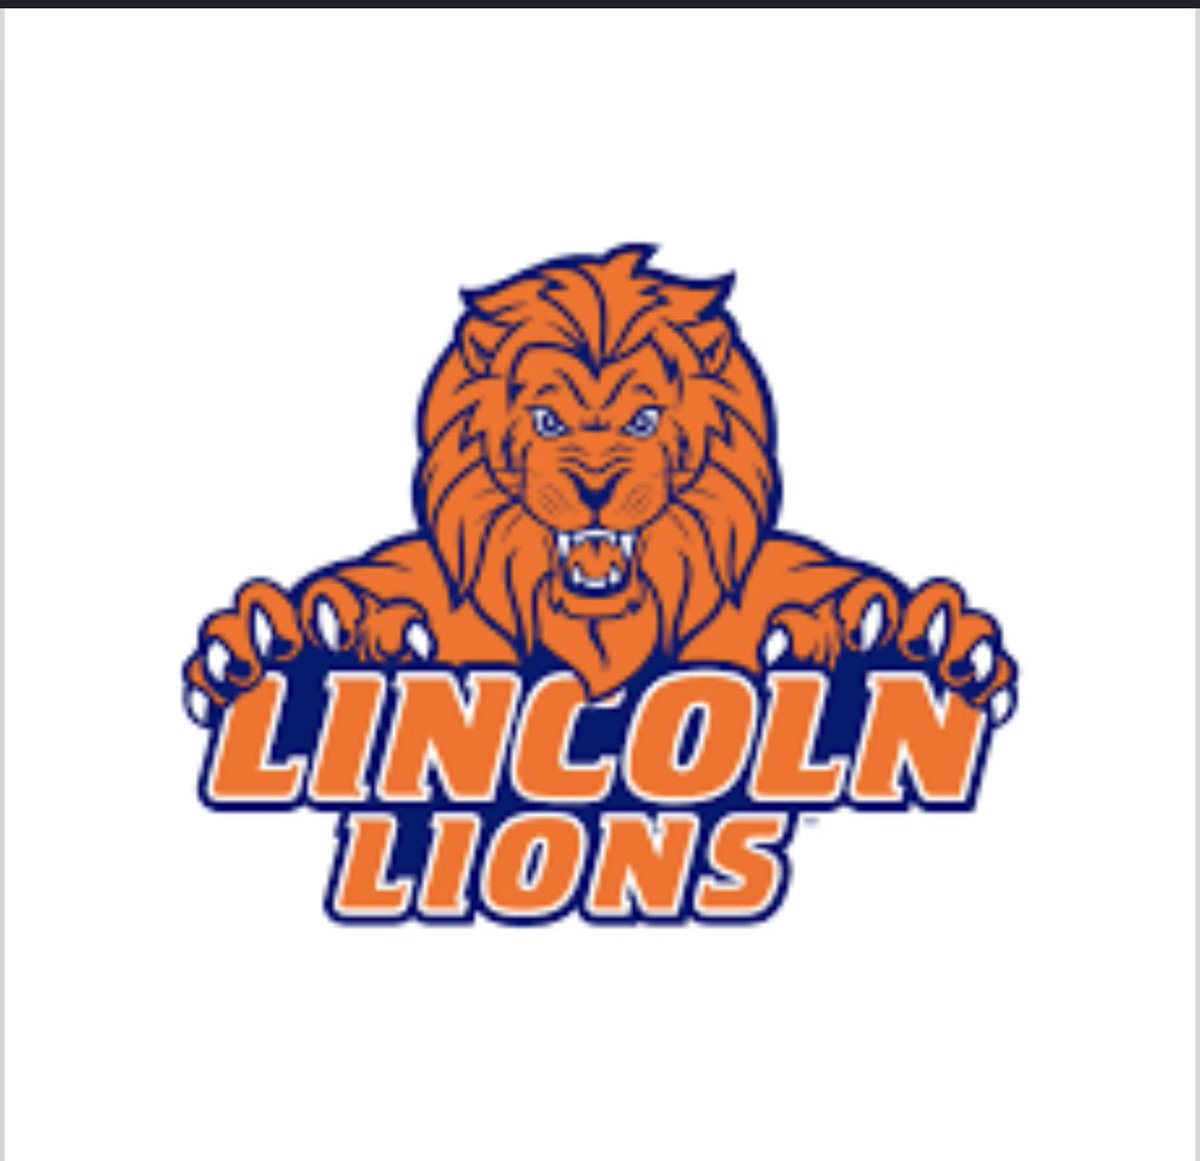 After a great conversation with @CoachtanQ I am blessed to receive my first D2 offer from Lincoln University @CoachStephenWCE @WCEastFootball @LUL1onsFootball